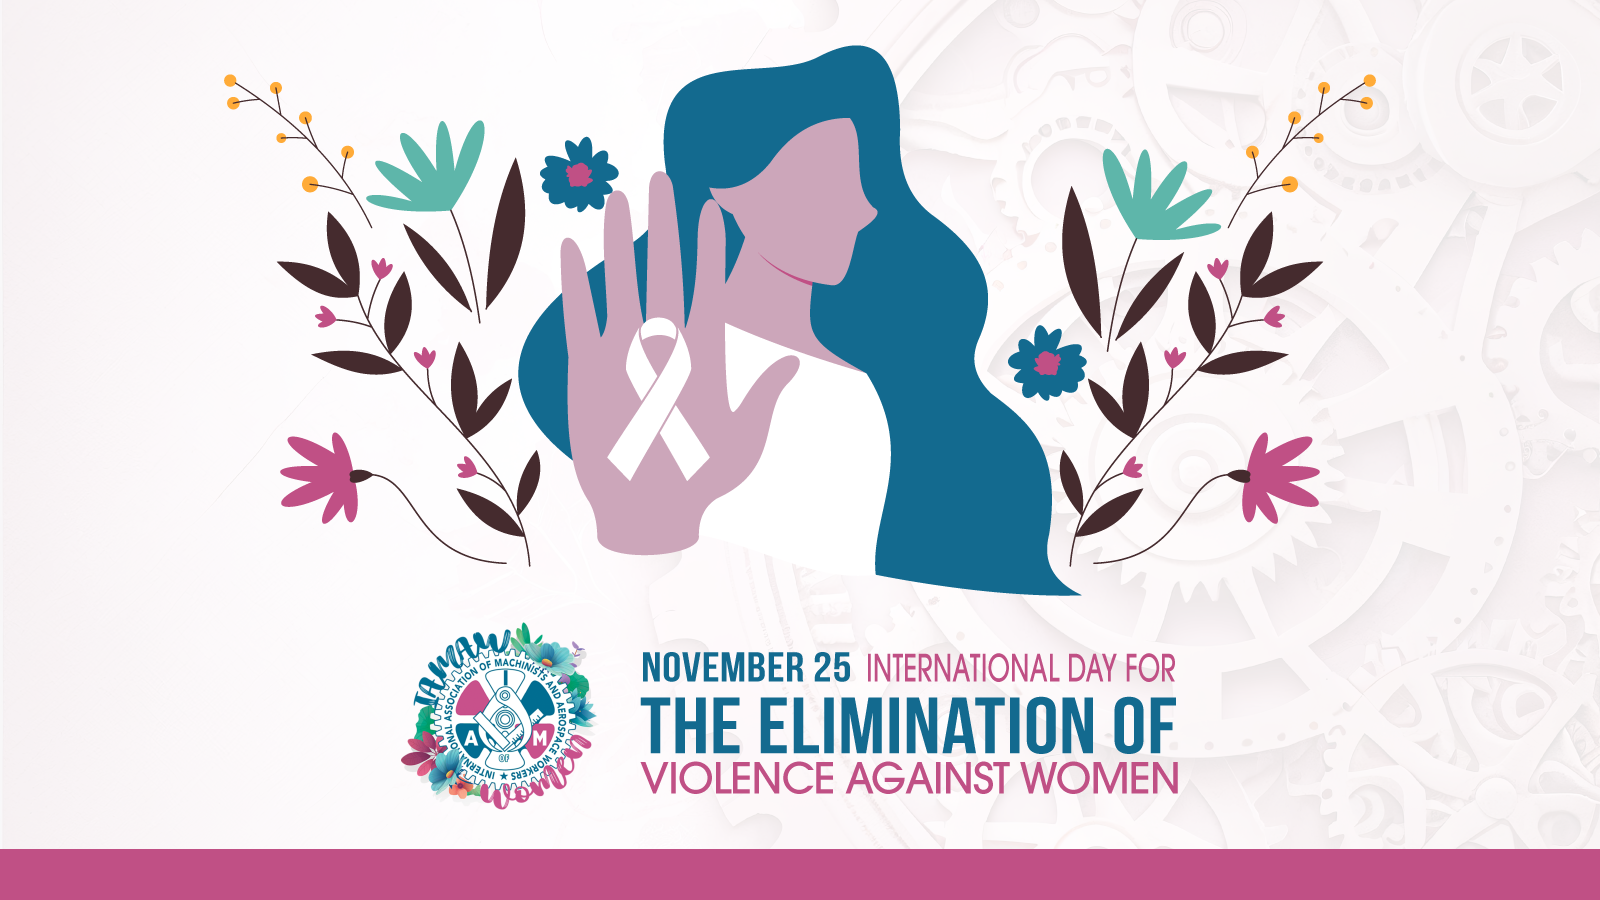 November 25th is International Day for the Elimination of Violence Against Women